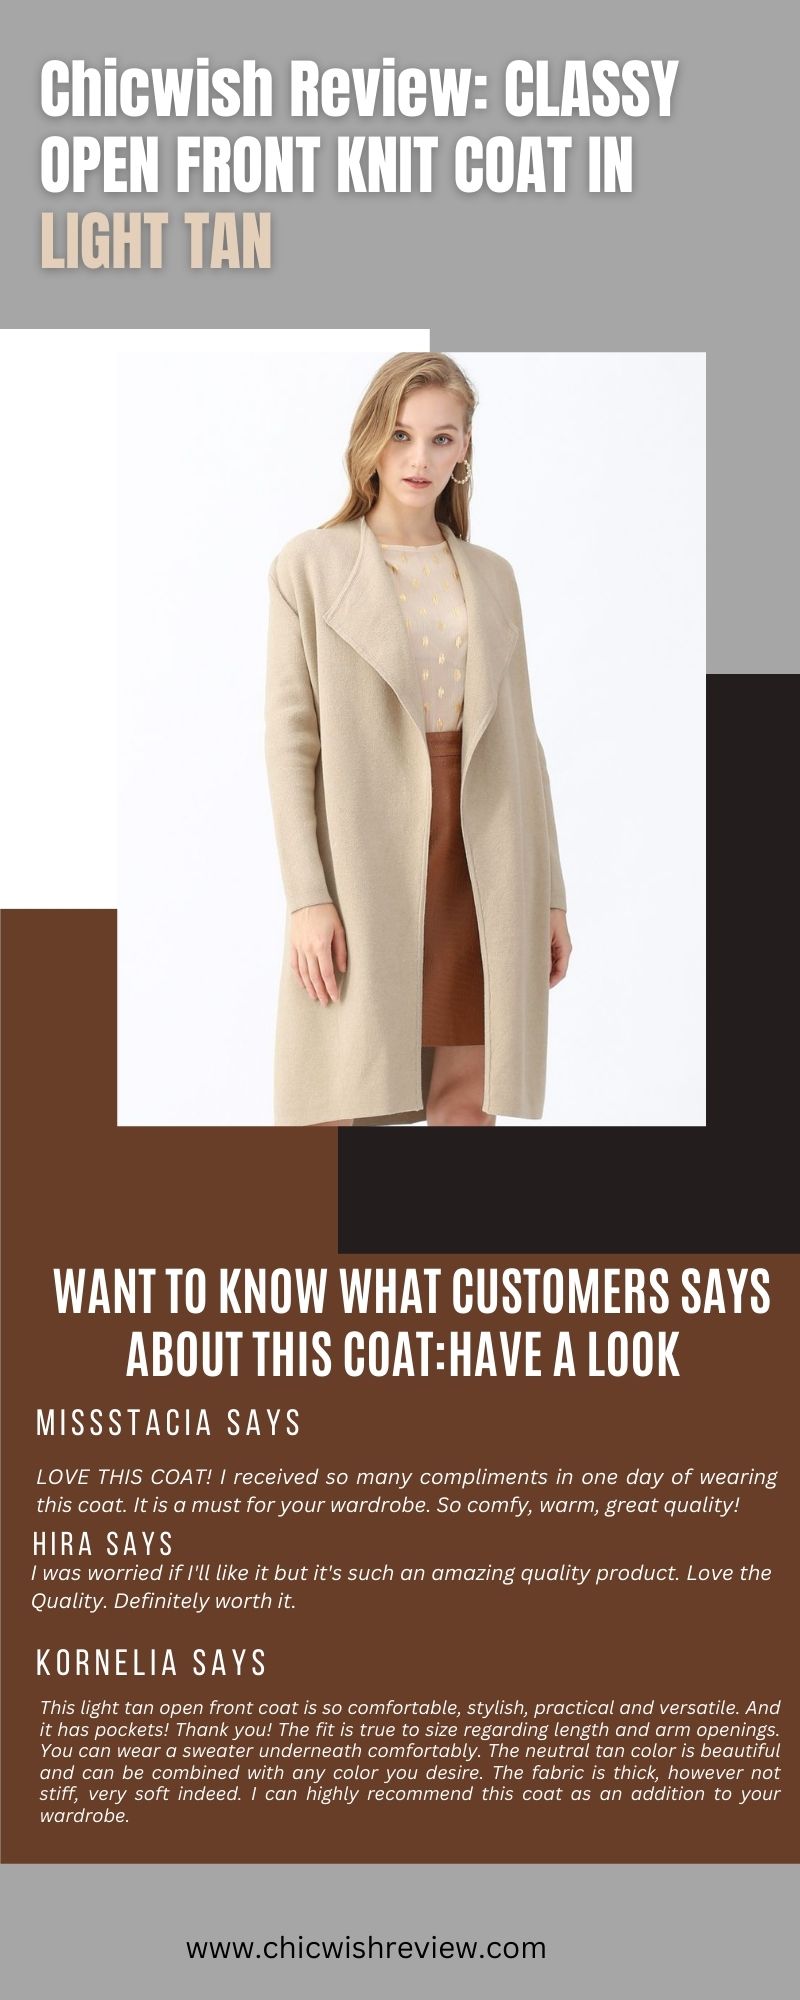 CLASSY OPEN FRONT KNIT COAT IN LIGHT TAN: Chicwish Review